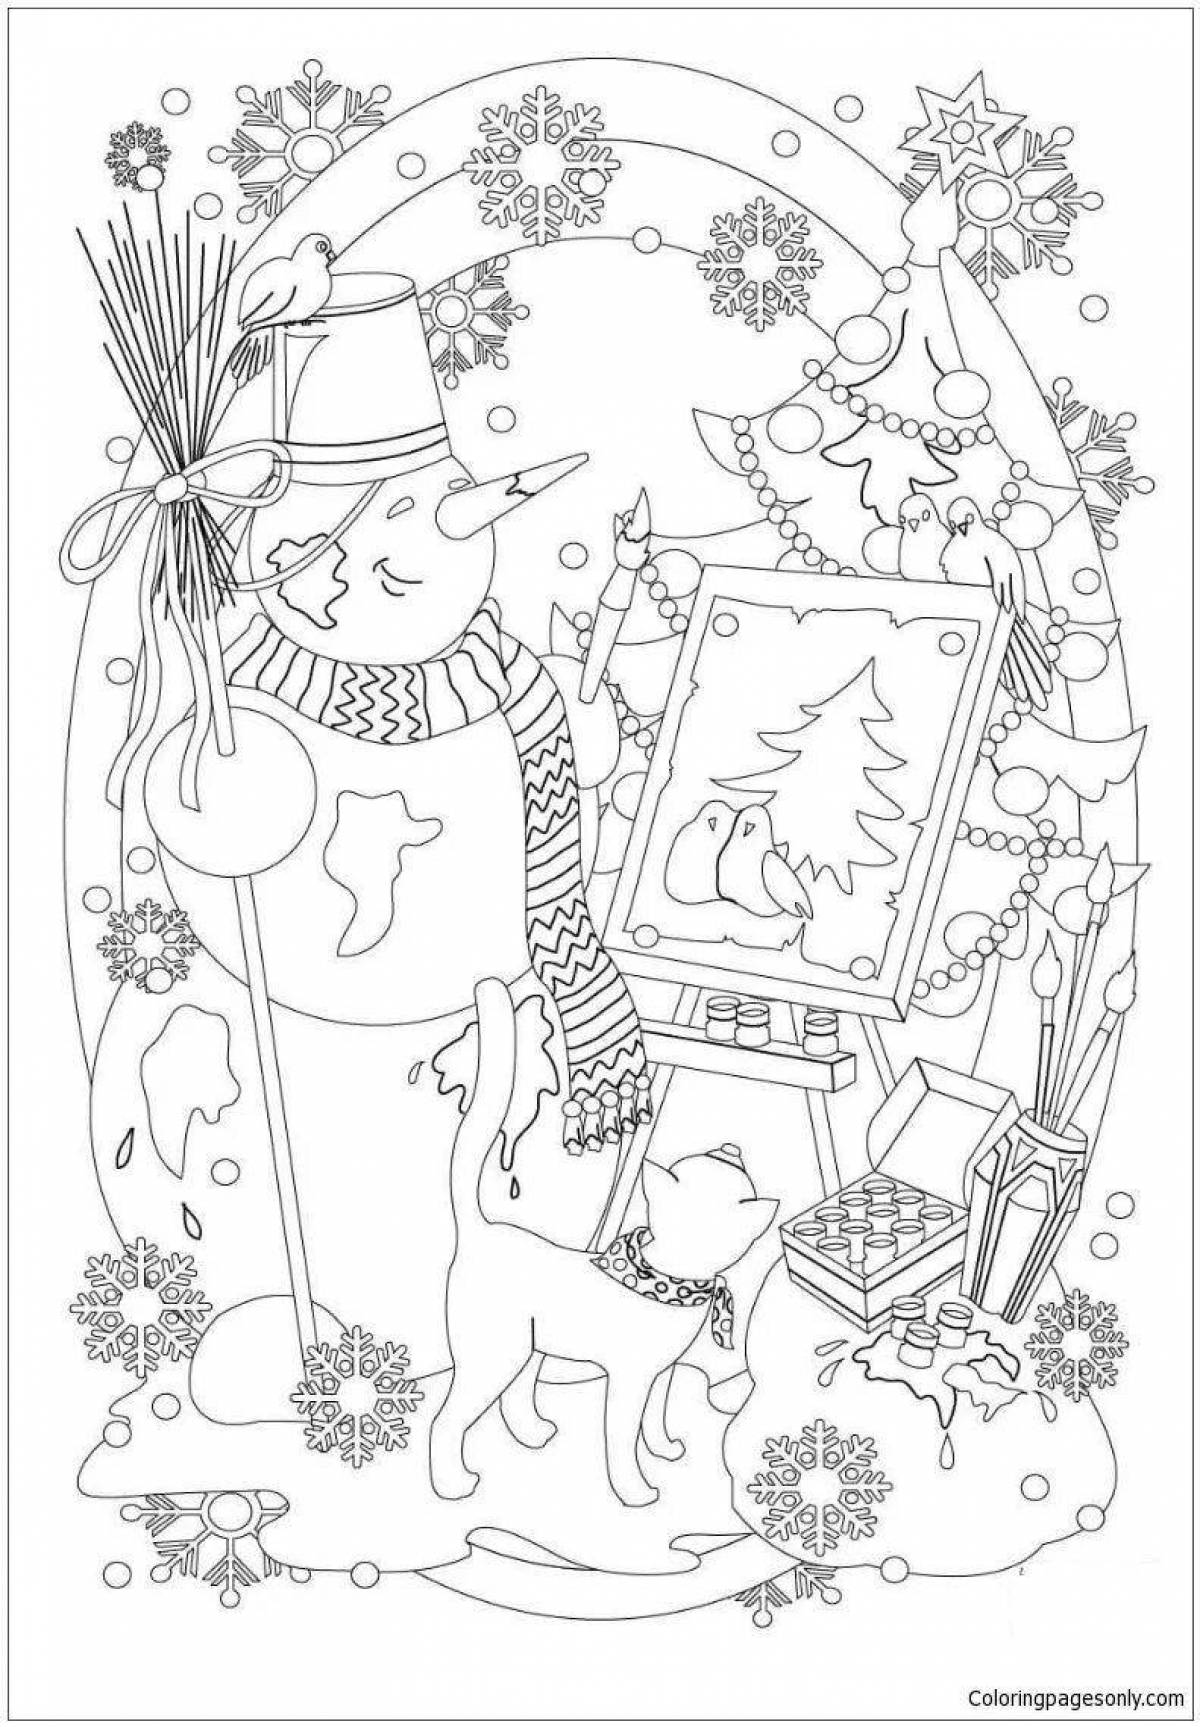 Funny winter anti-stress coloring book for kids